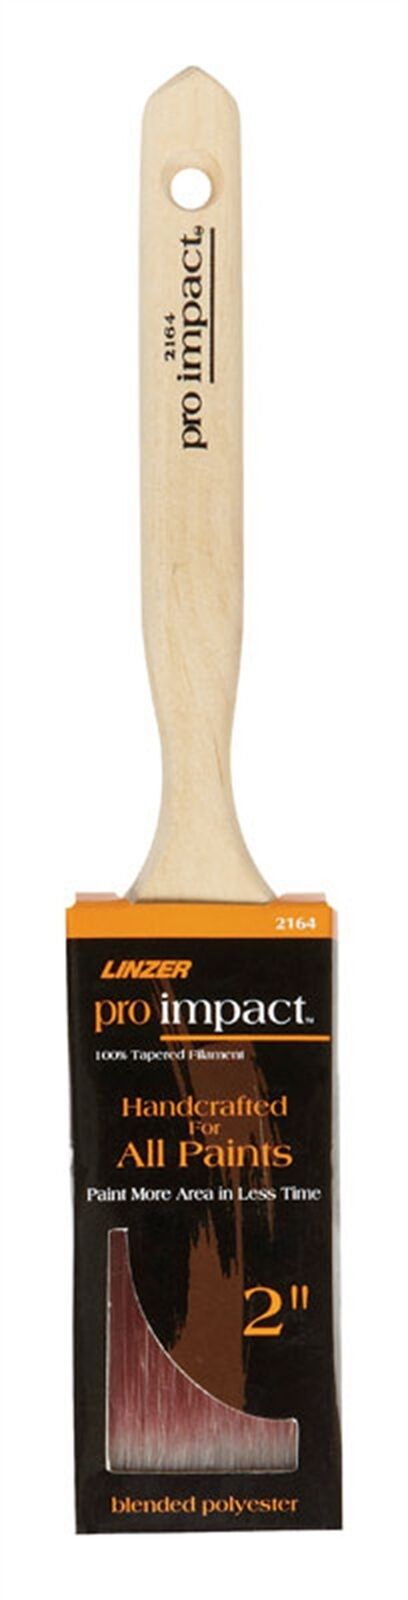 Linzer 2164-2 Pro Impact Blended Polyester Flat Sash Paint Brush 2 W in.